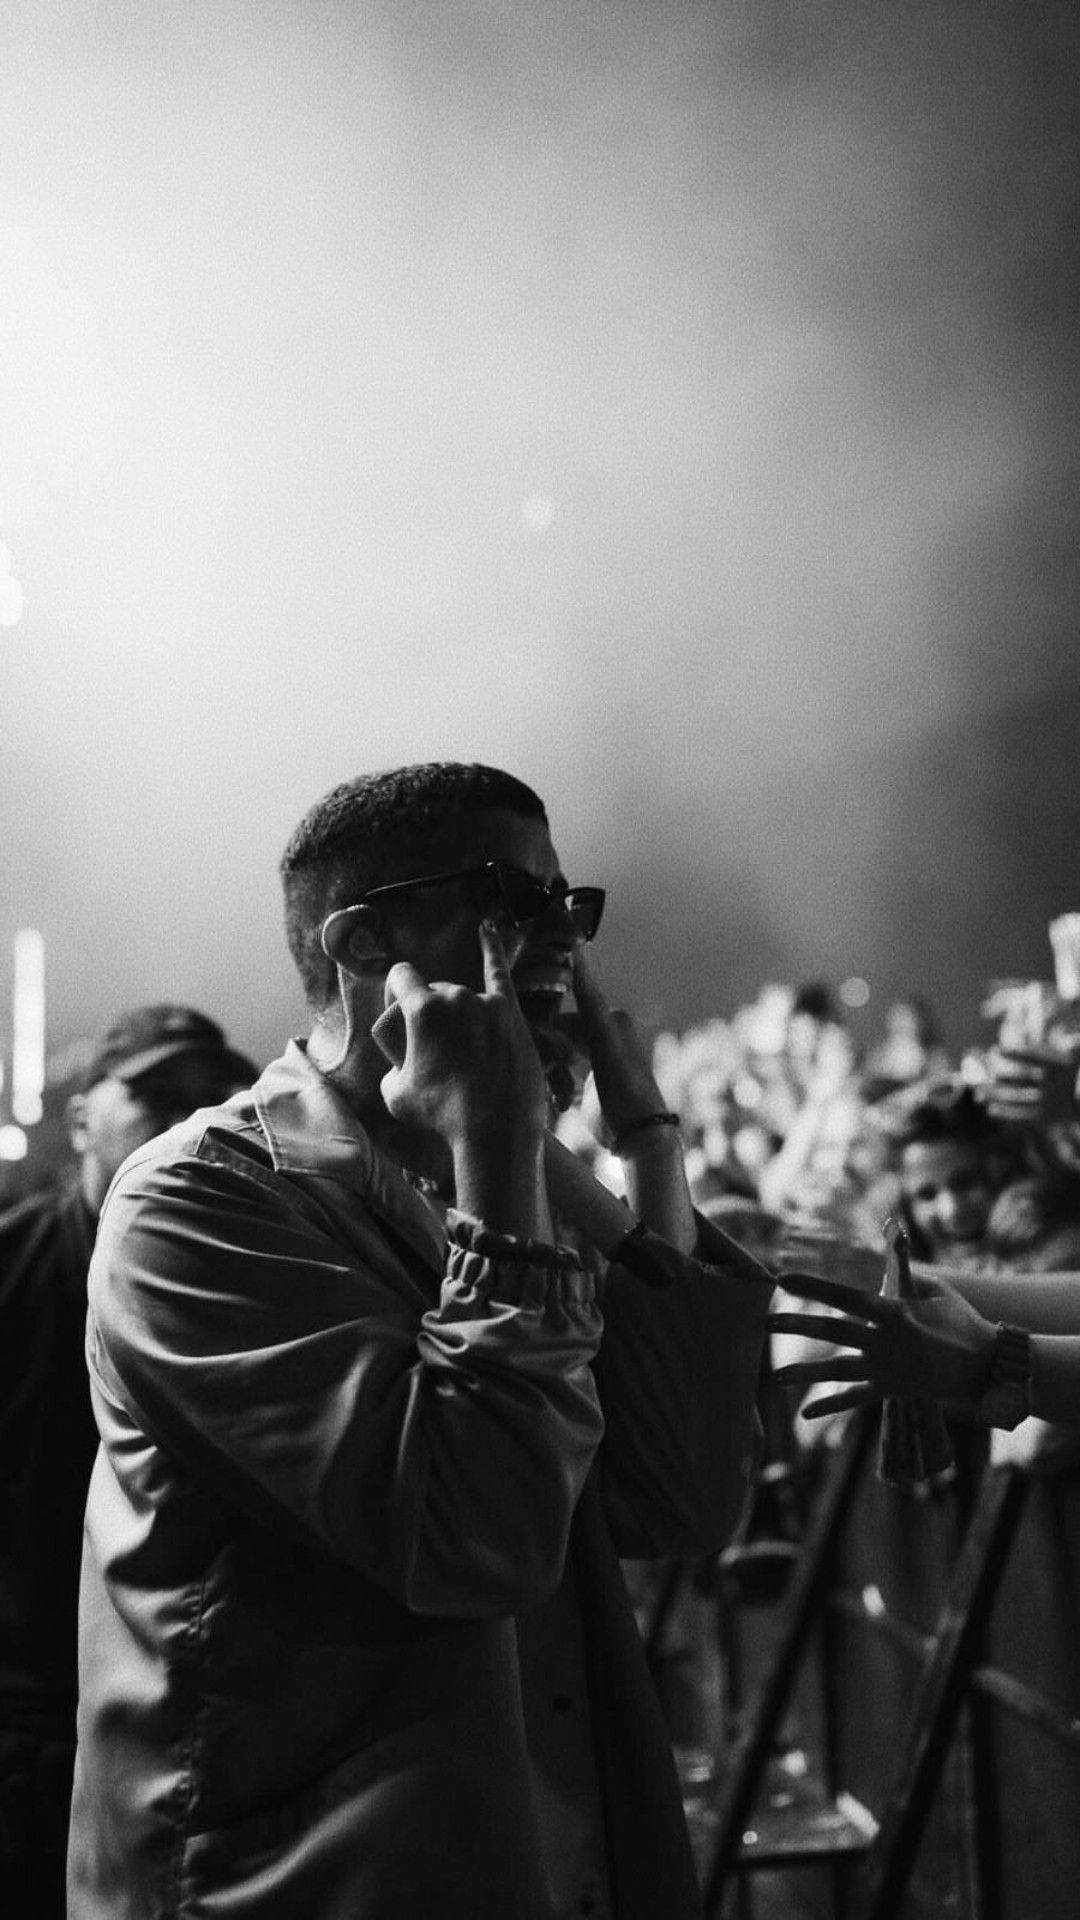 Download Bad Bunny Interacting With The Fans Wallpaper